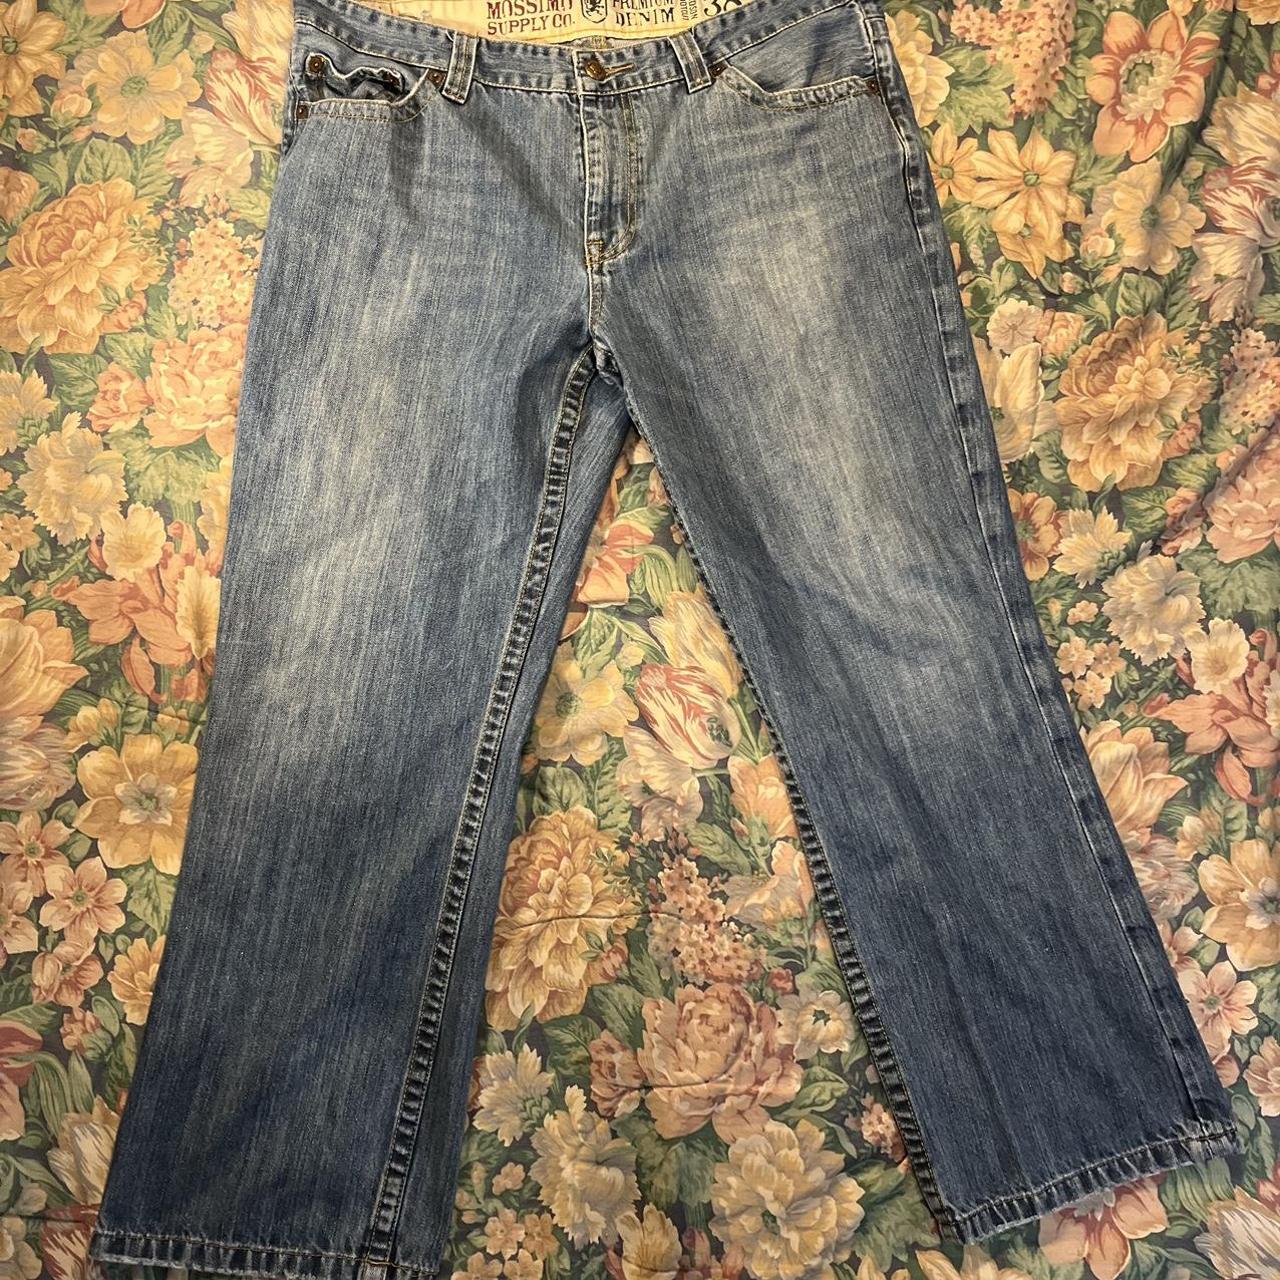 Mossimo Supply Co., Jeans